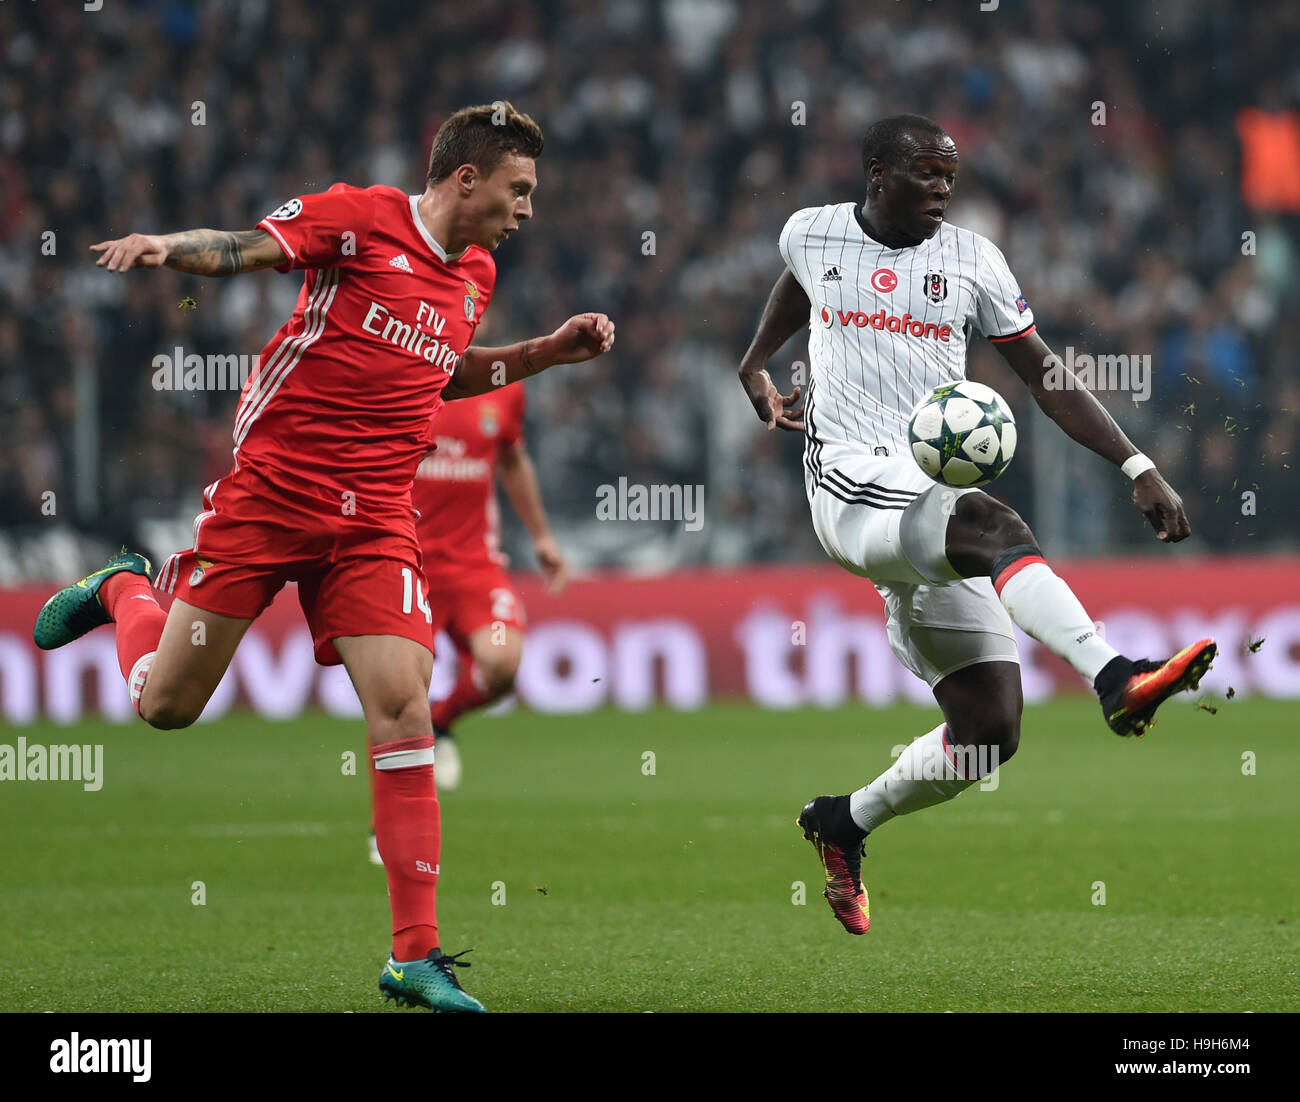 Istanbul, Turkey. 24th Nov, 2016. Vincent Aboubaker (R) of Besiktas  controls the ball during the UEFA Champions League Group B match between  Turkey's Besiktas and Portugal's Benfica in Istanbul, Turkey, on Nov.